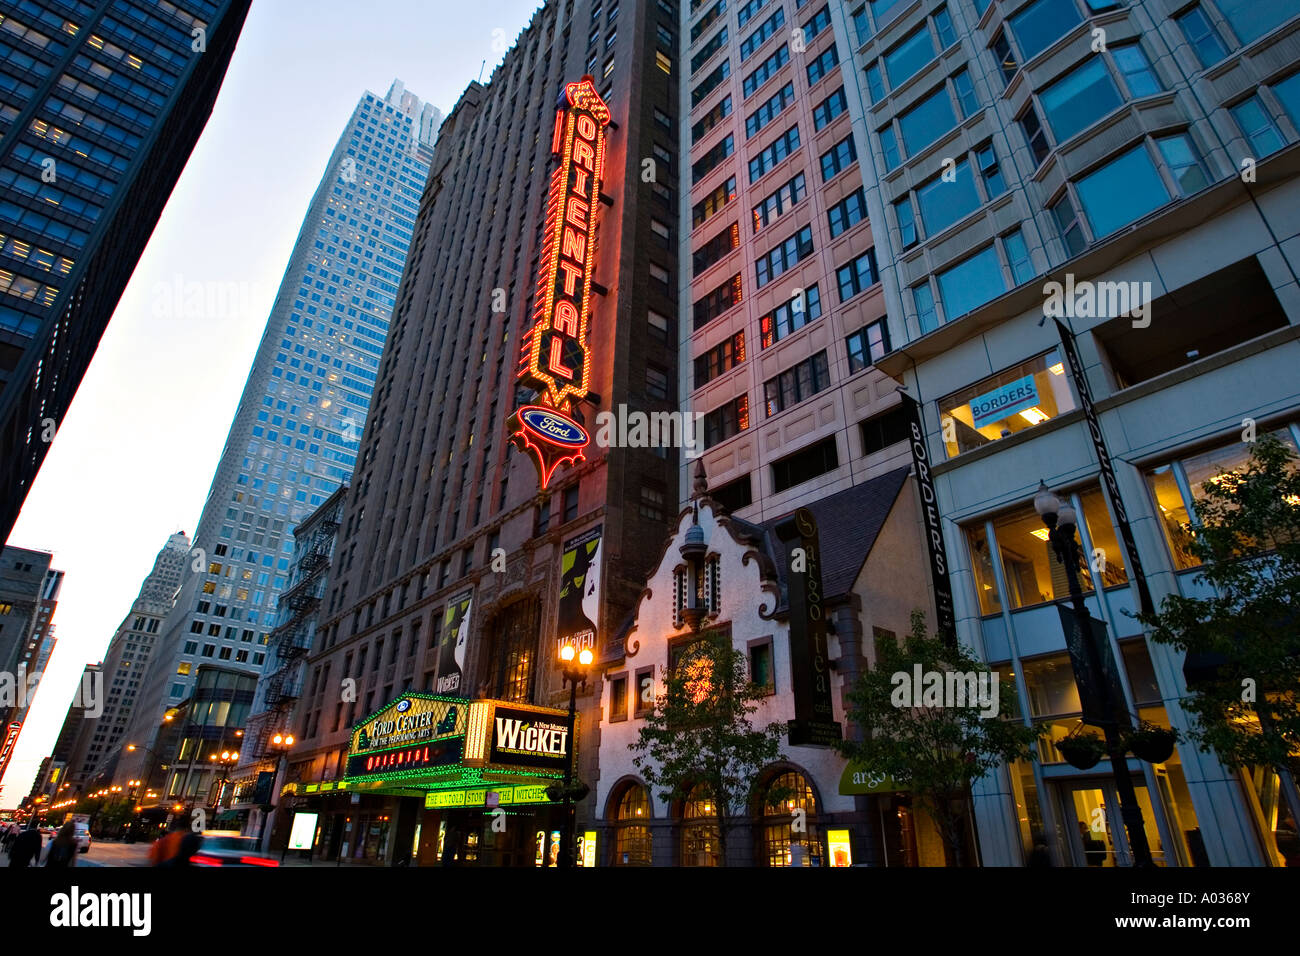 ILLINOIS Chicago Wicked broadway show marquee on Ford Oriental theater on Randolph street Theater district at night Stock Photo